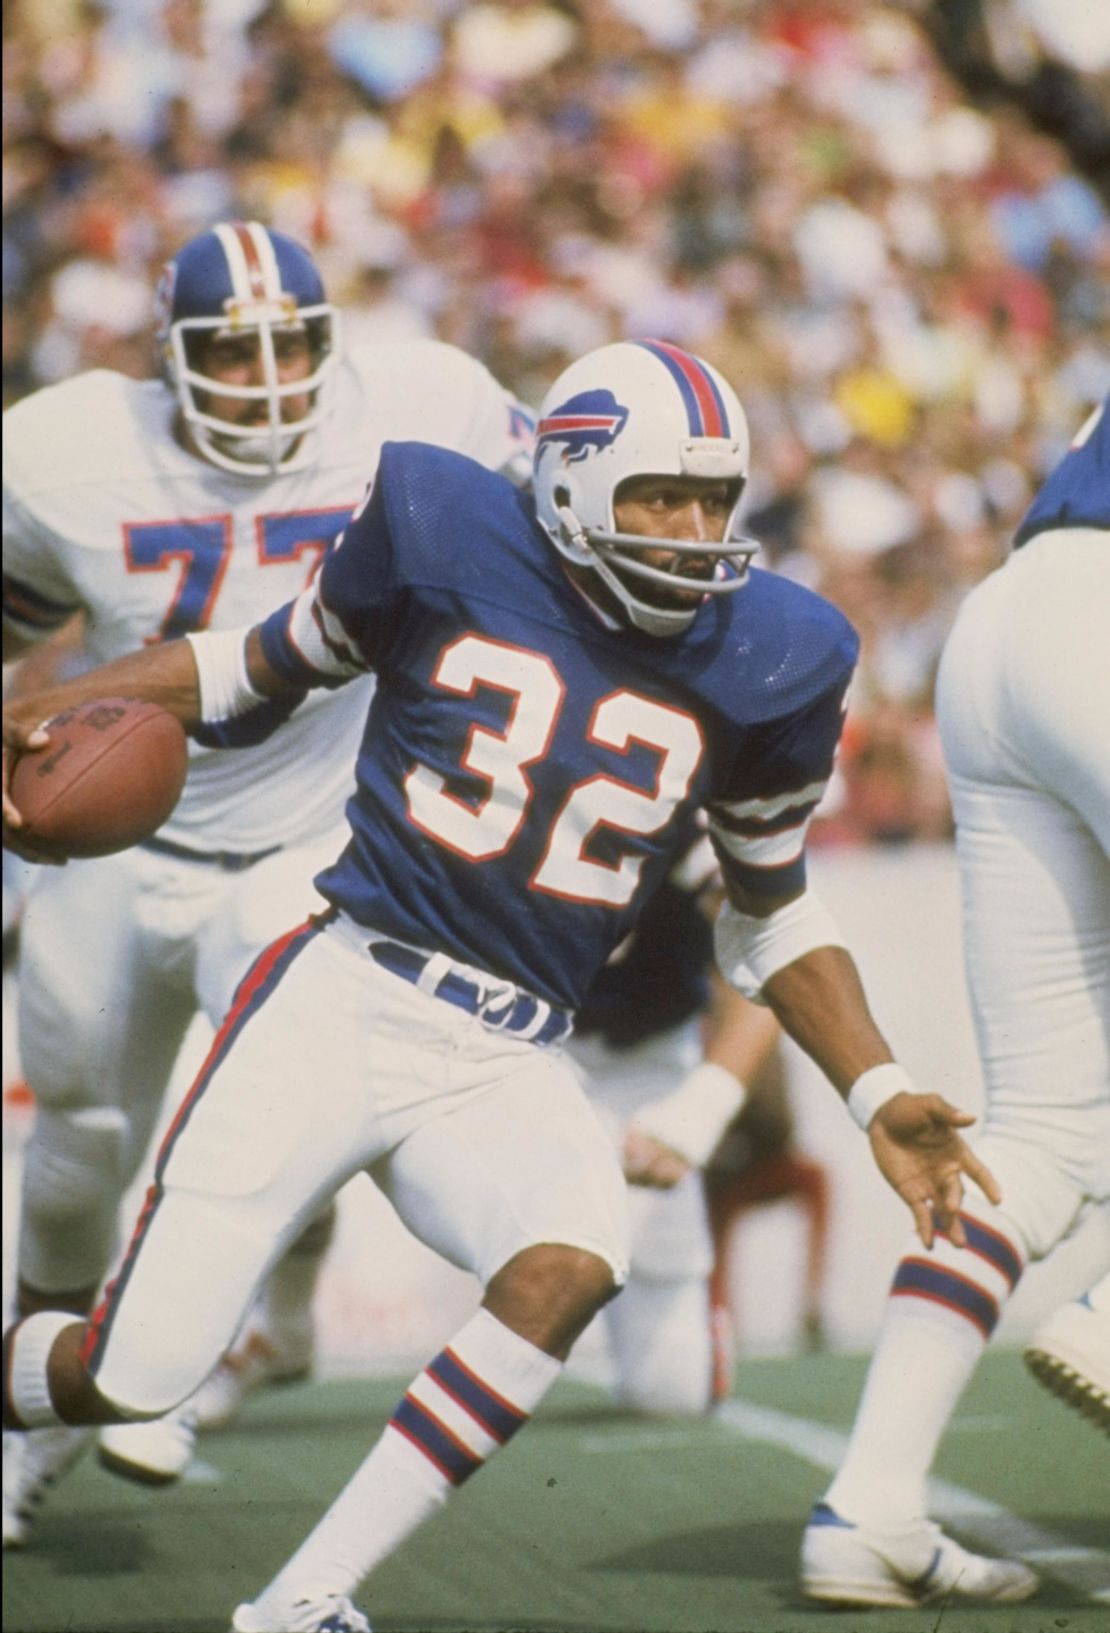 O.J. Simpson of the Buffalo Bills in action during a game against the Denver Broncos at Rich Stadium in New York.